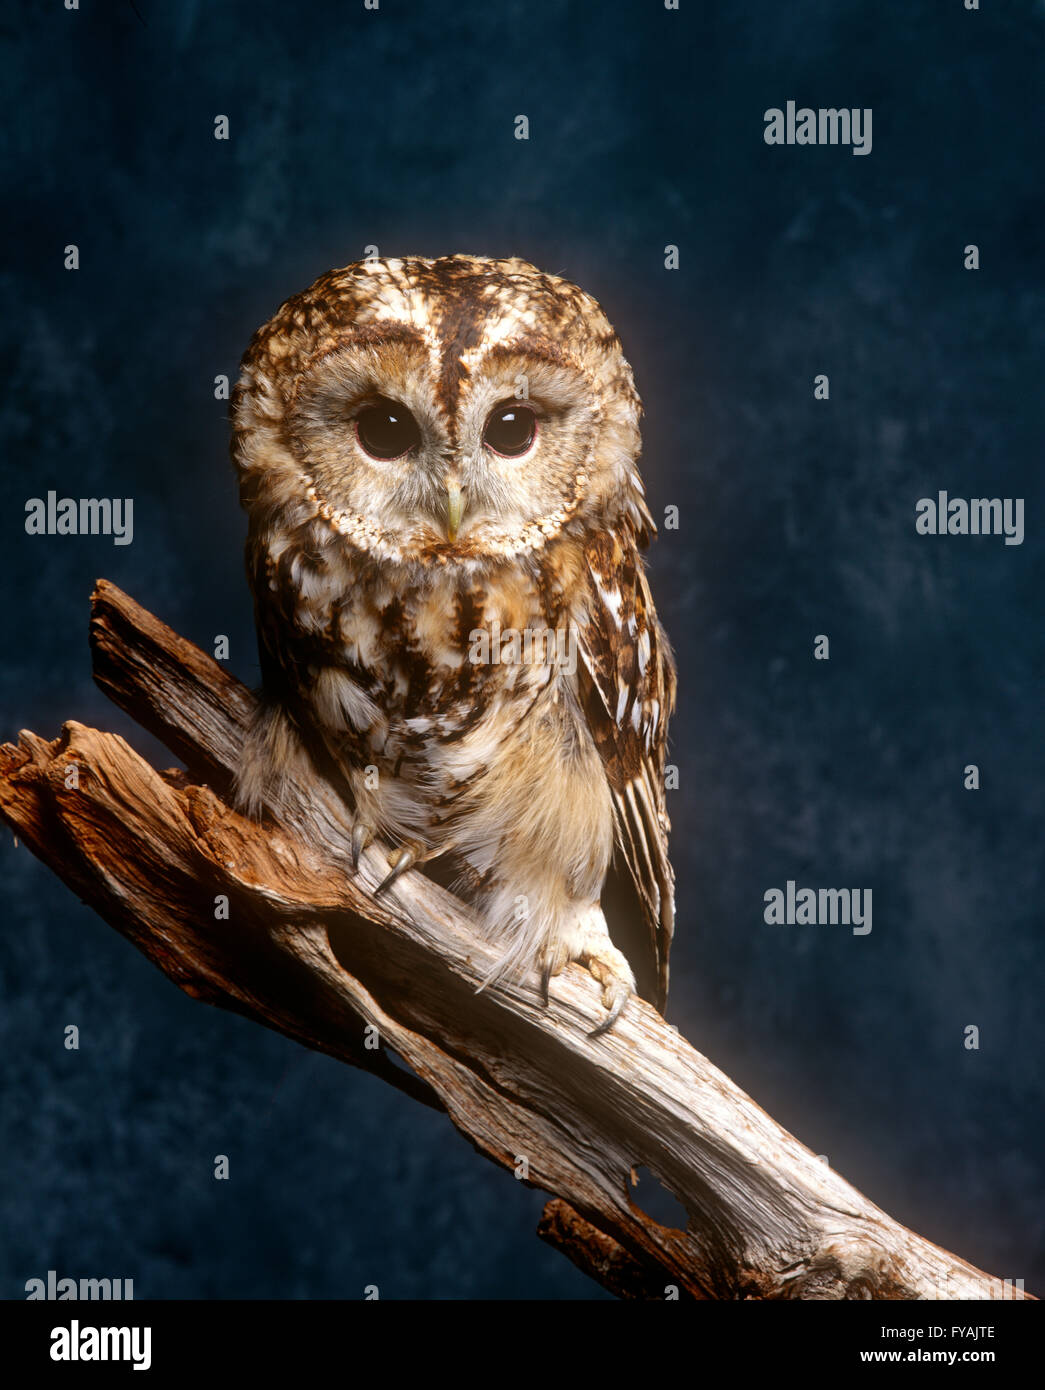 Barn owl with large eyes sitting on a branch, inside. Stock Photo